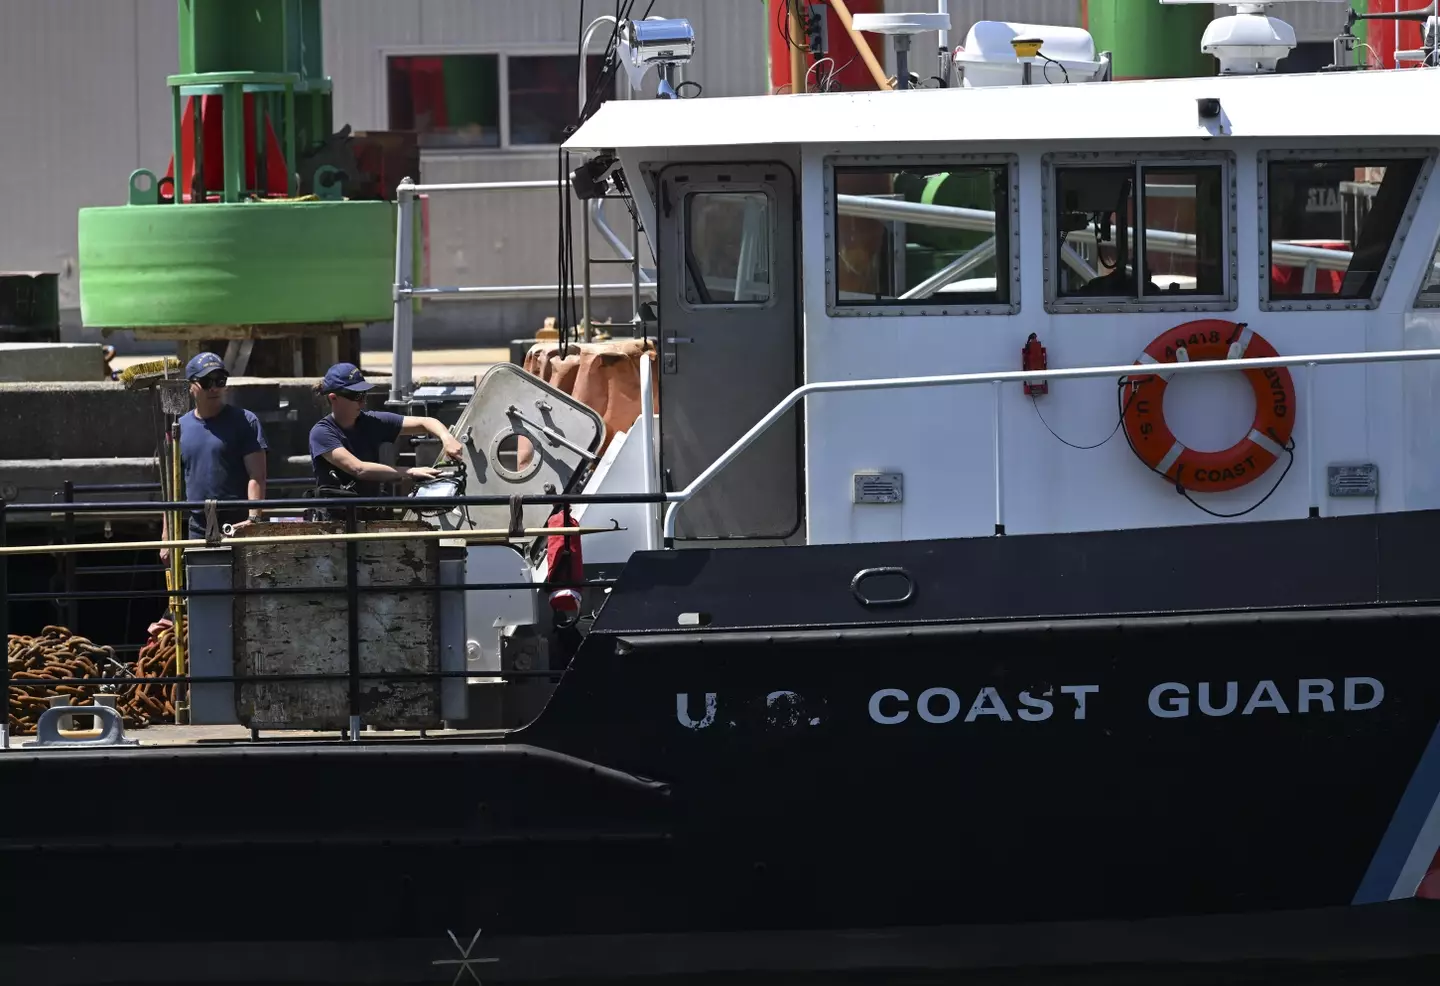 The US Coast Guard has taken over the search for the man.